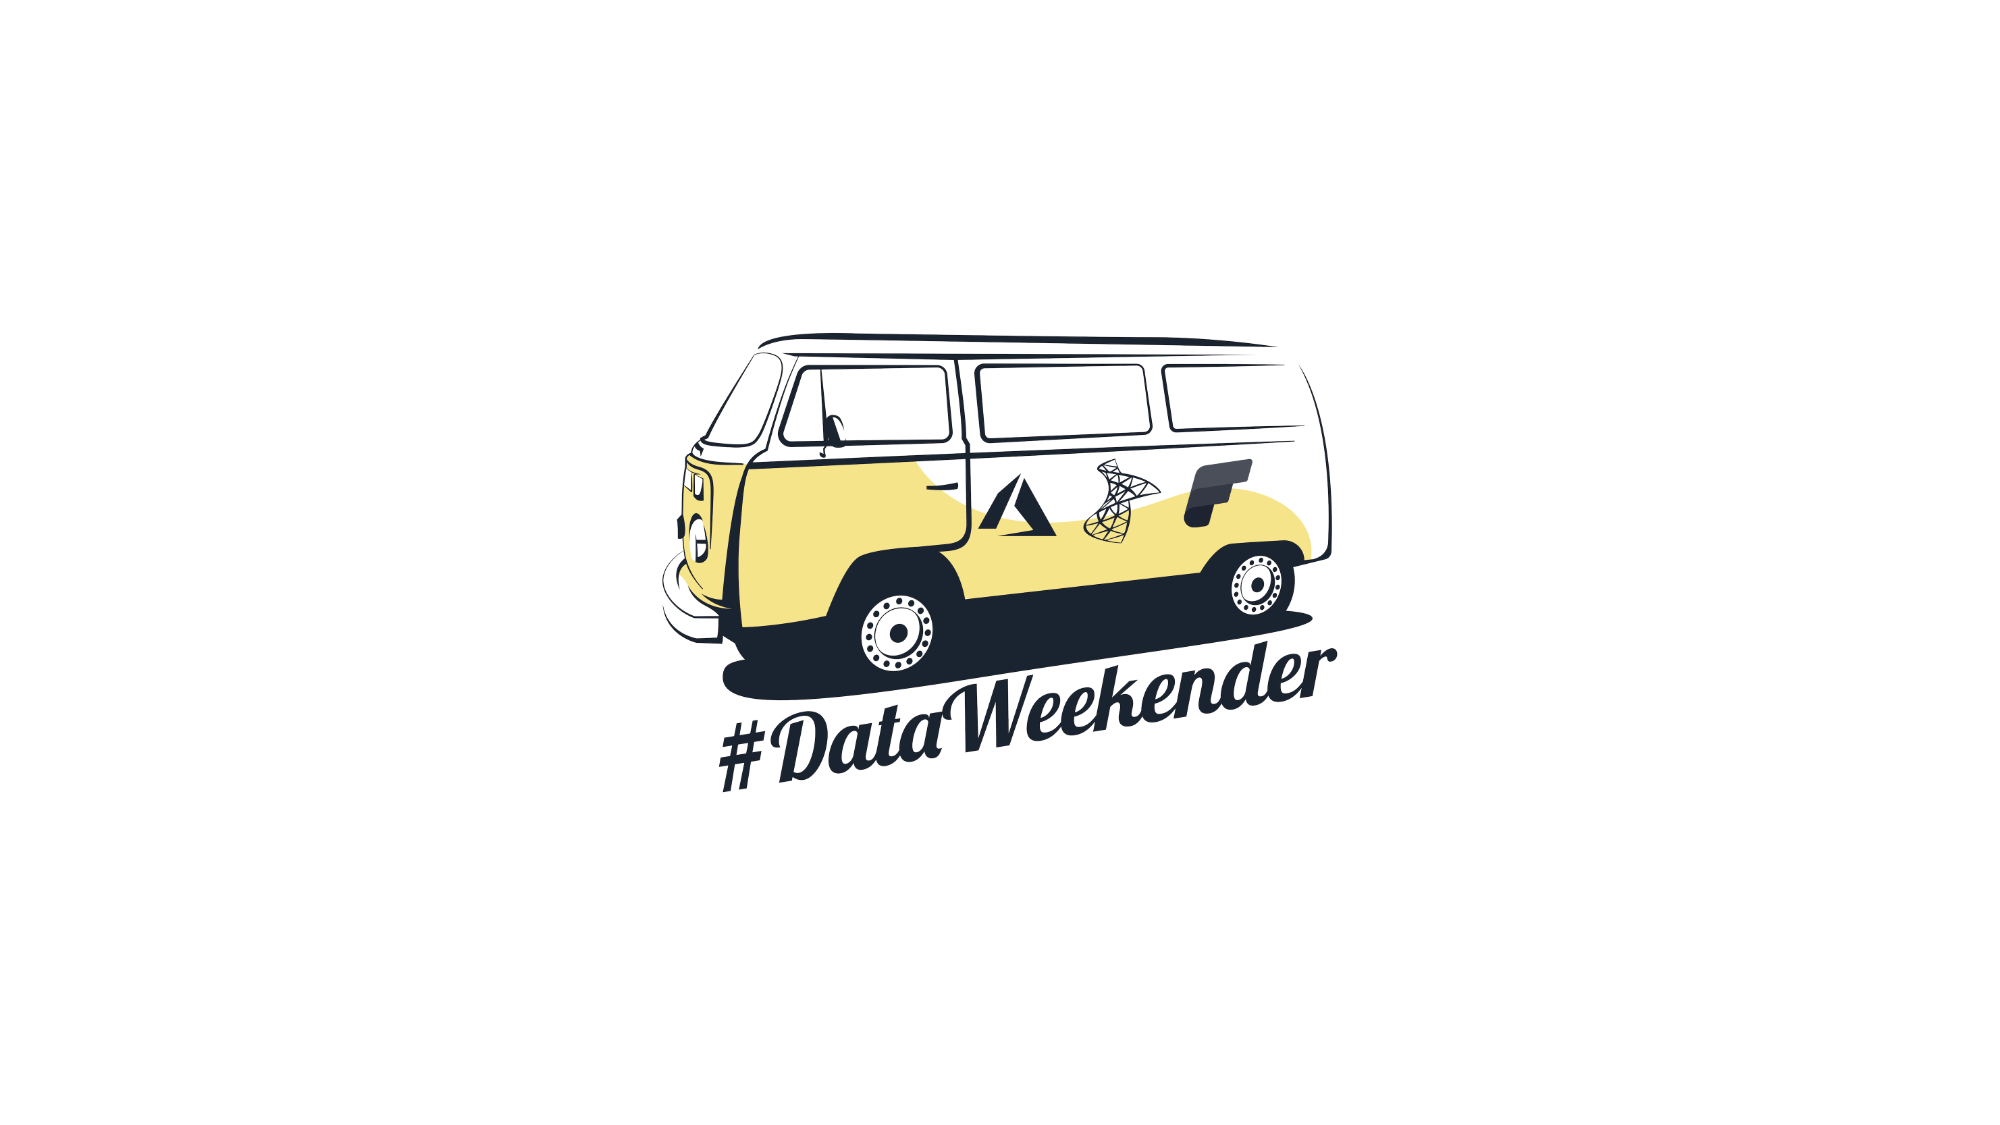 the #DataWeekender logo, a yellow and white camper van with the Azure, SQL Server and Fabric logos across the side of it